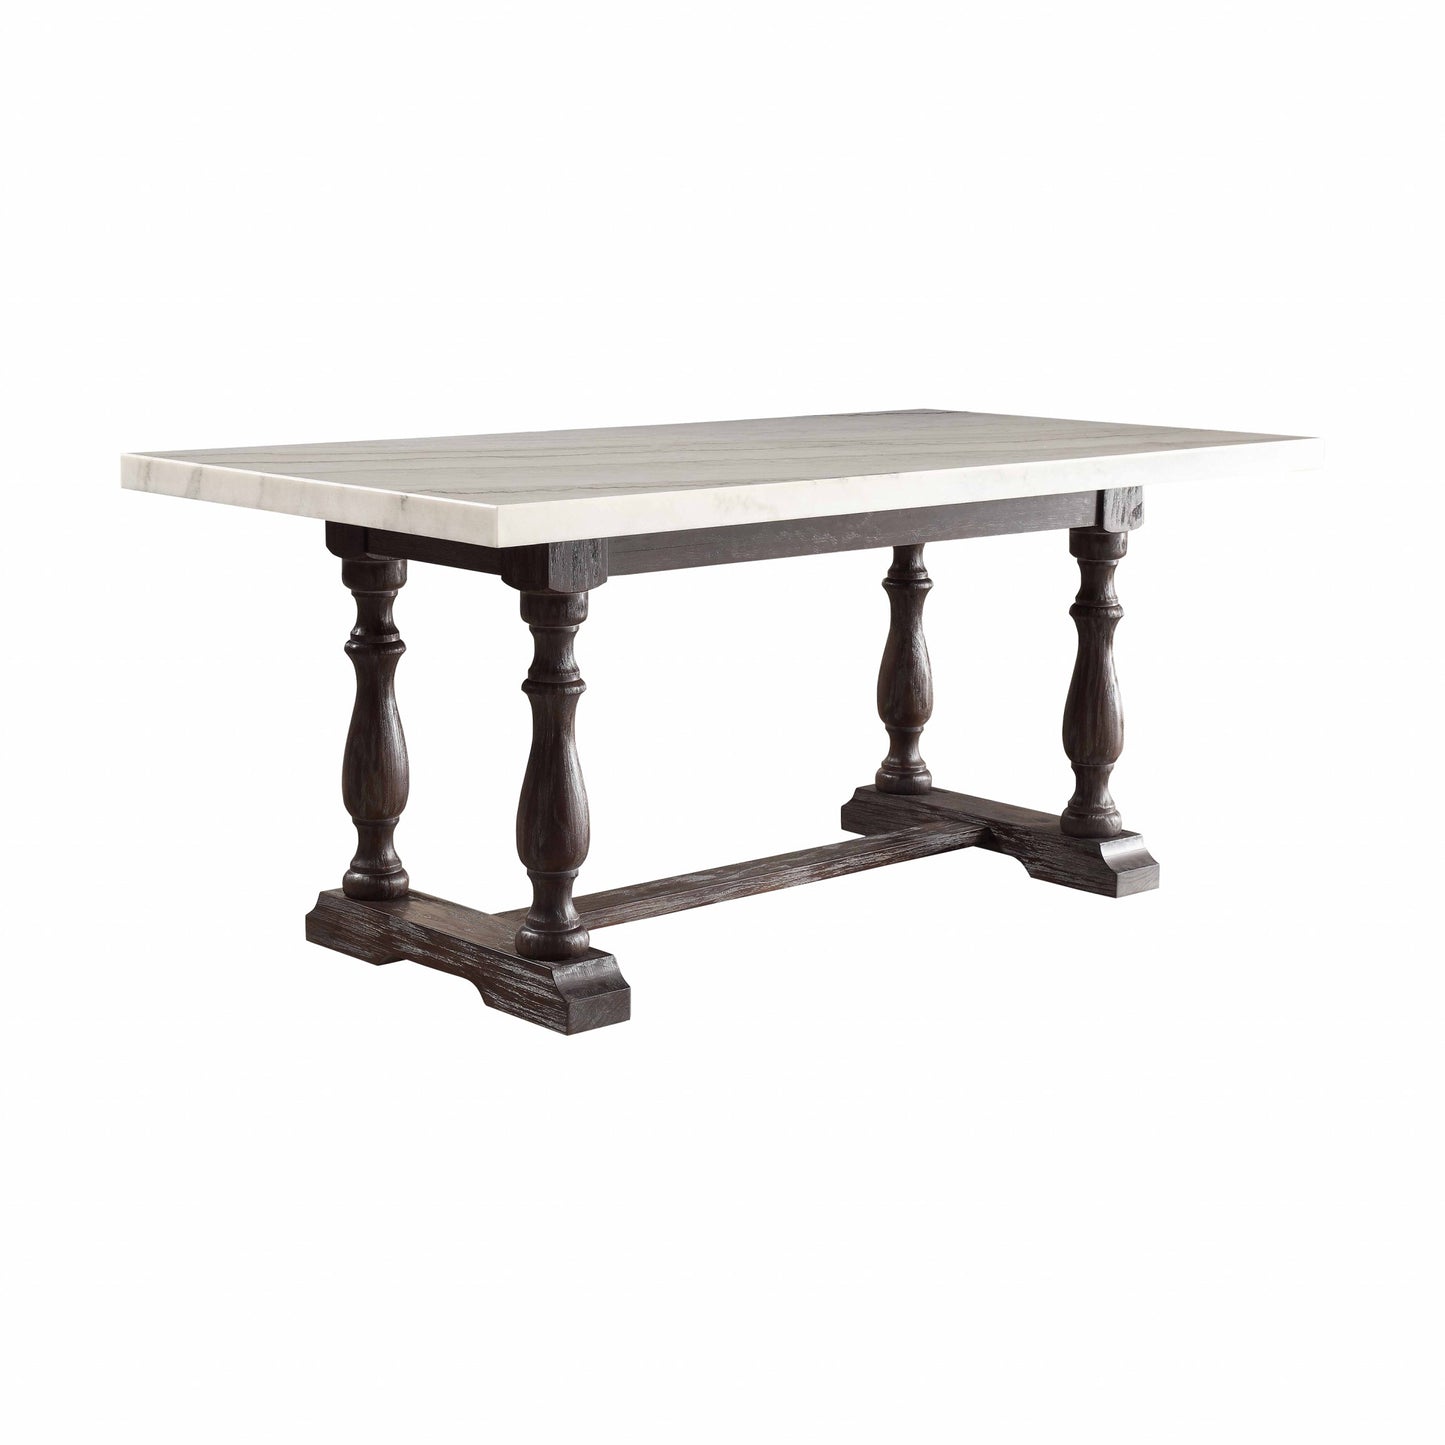 72"x38" White And Gray Marble And Solid Wood Dining Table